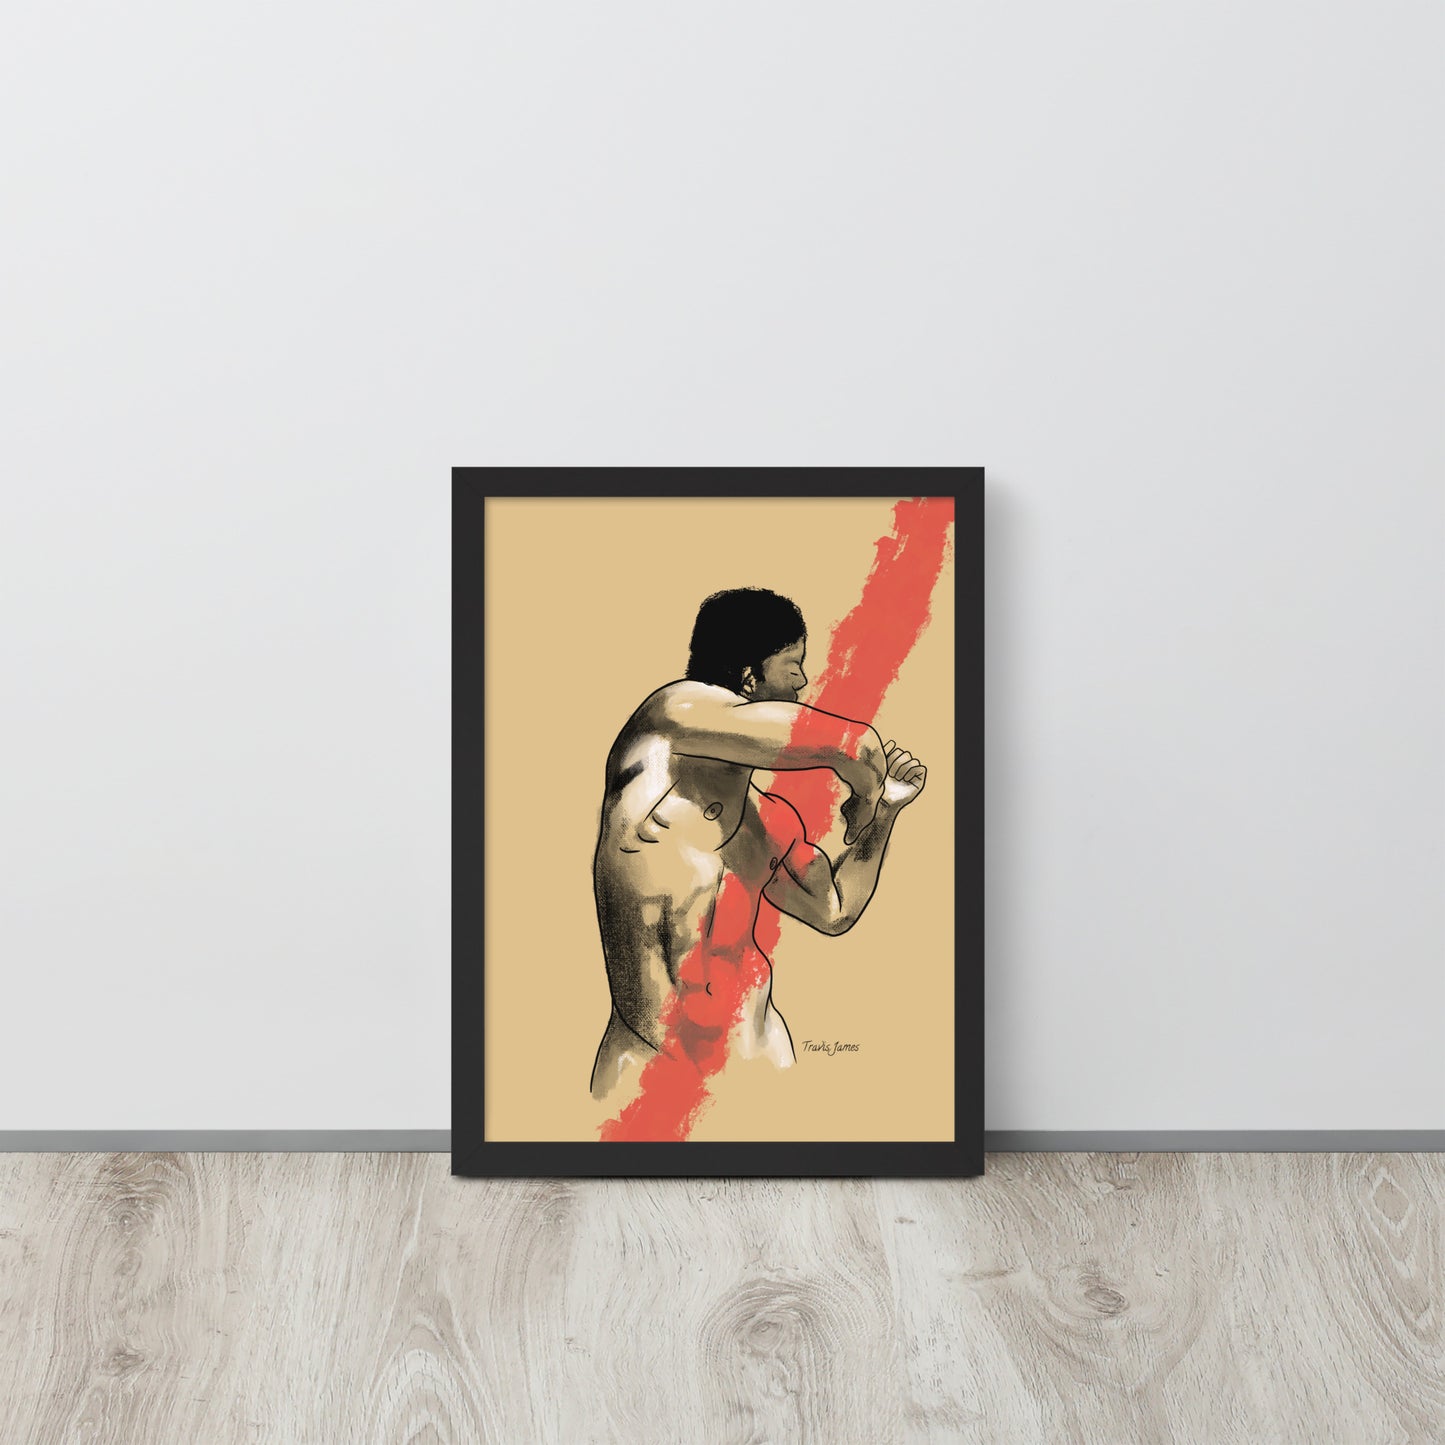 Art Print "Blinded no more"